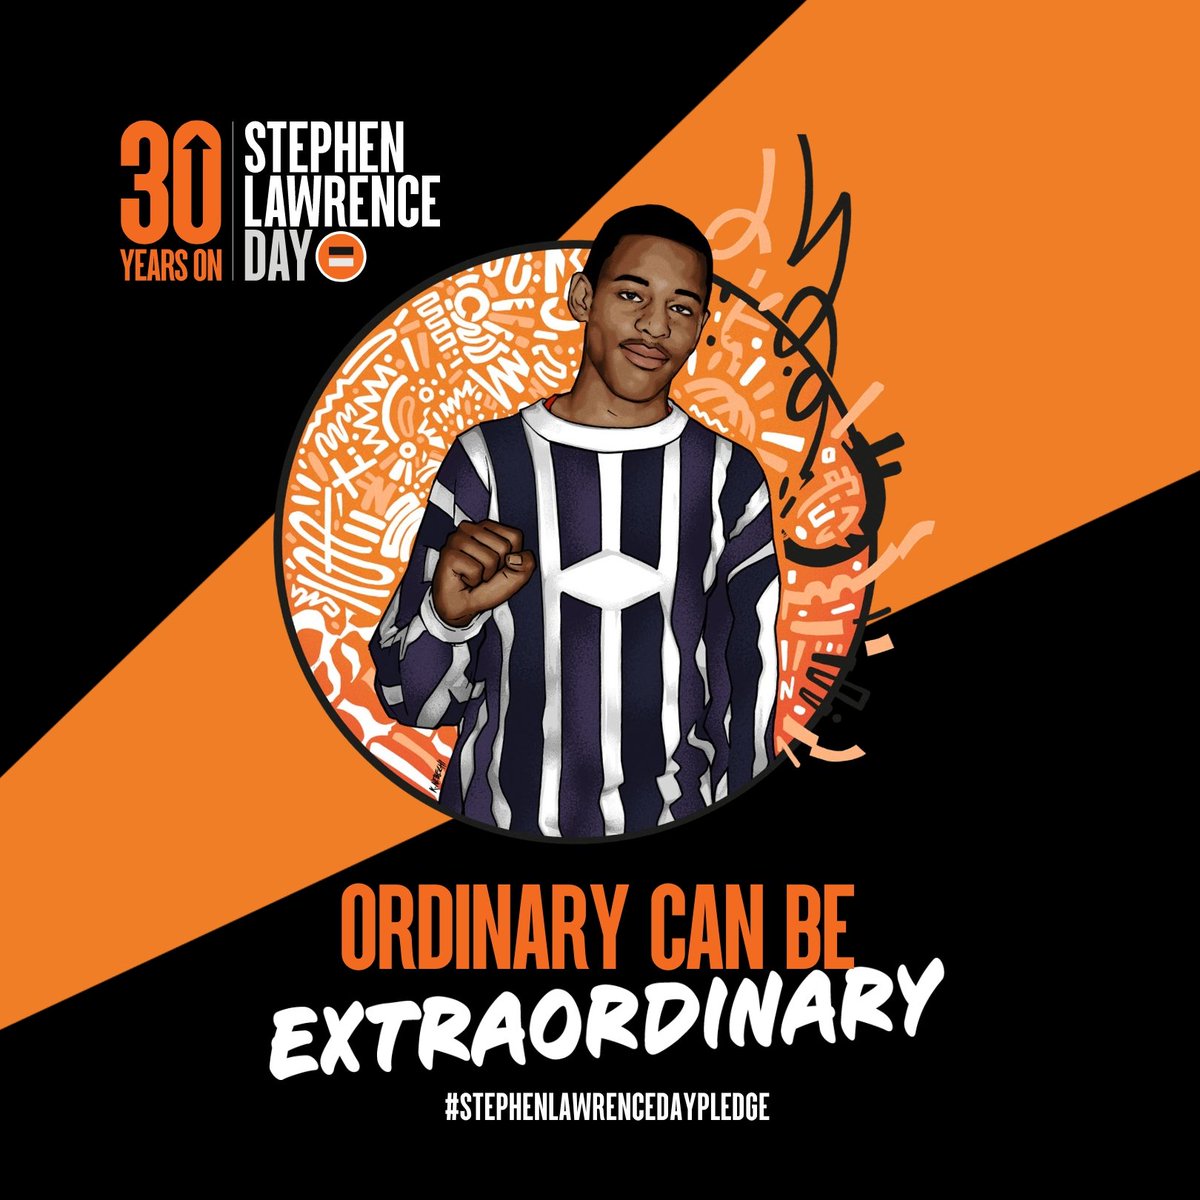 This Stephen Lawrence Day I pledge to keep raising awareness in order to make sure the next 30 years look different from the last #stephenlawrencedaypledge Spread the word – tag a friend, organisation or brand and challenge them to make their own #stephenlawrencedaypledge